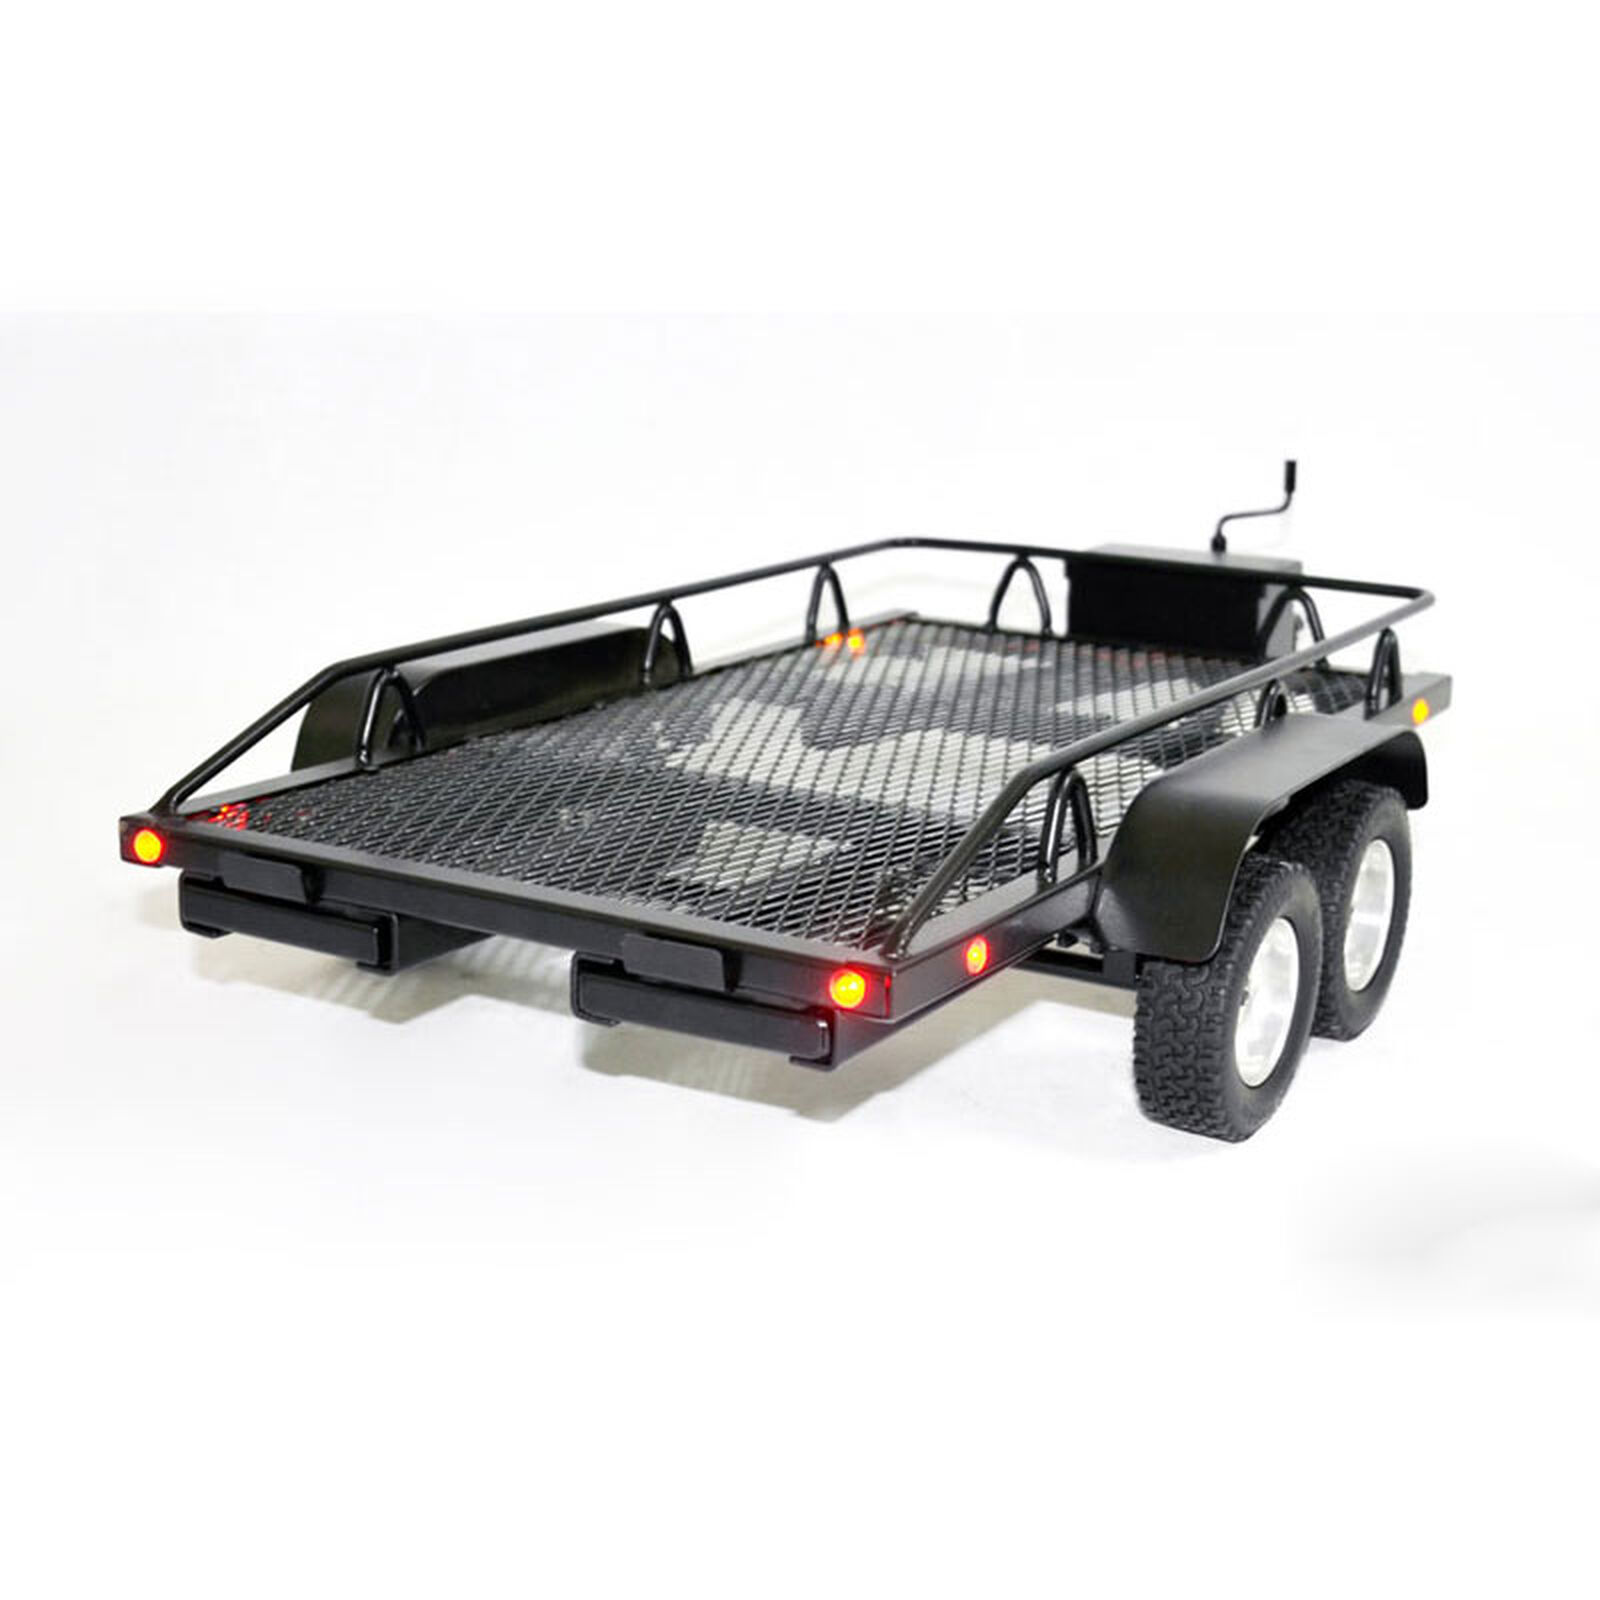 1:10 Scale Dual Axle Trailer Kit w/ Lights for RC Rock Crawler Truck Buggy Car